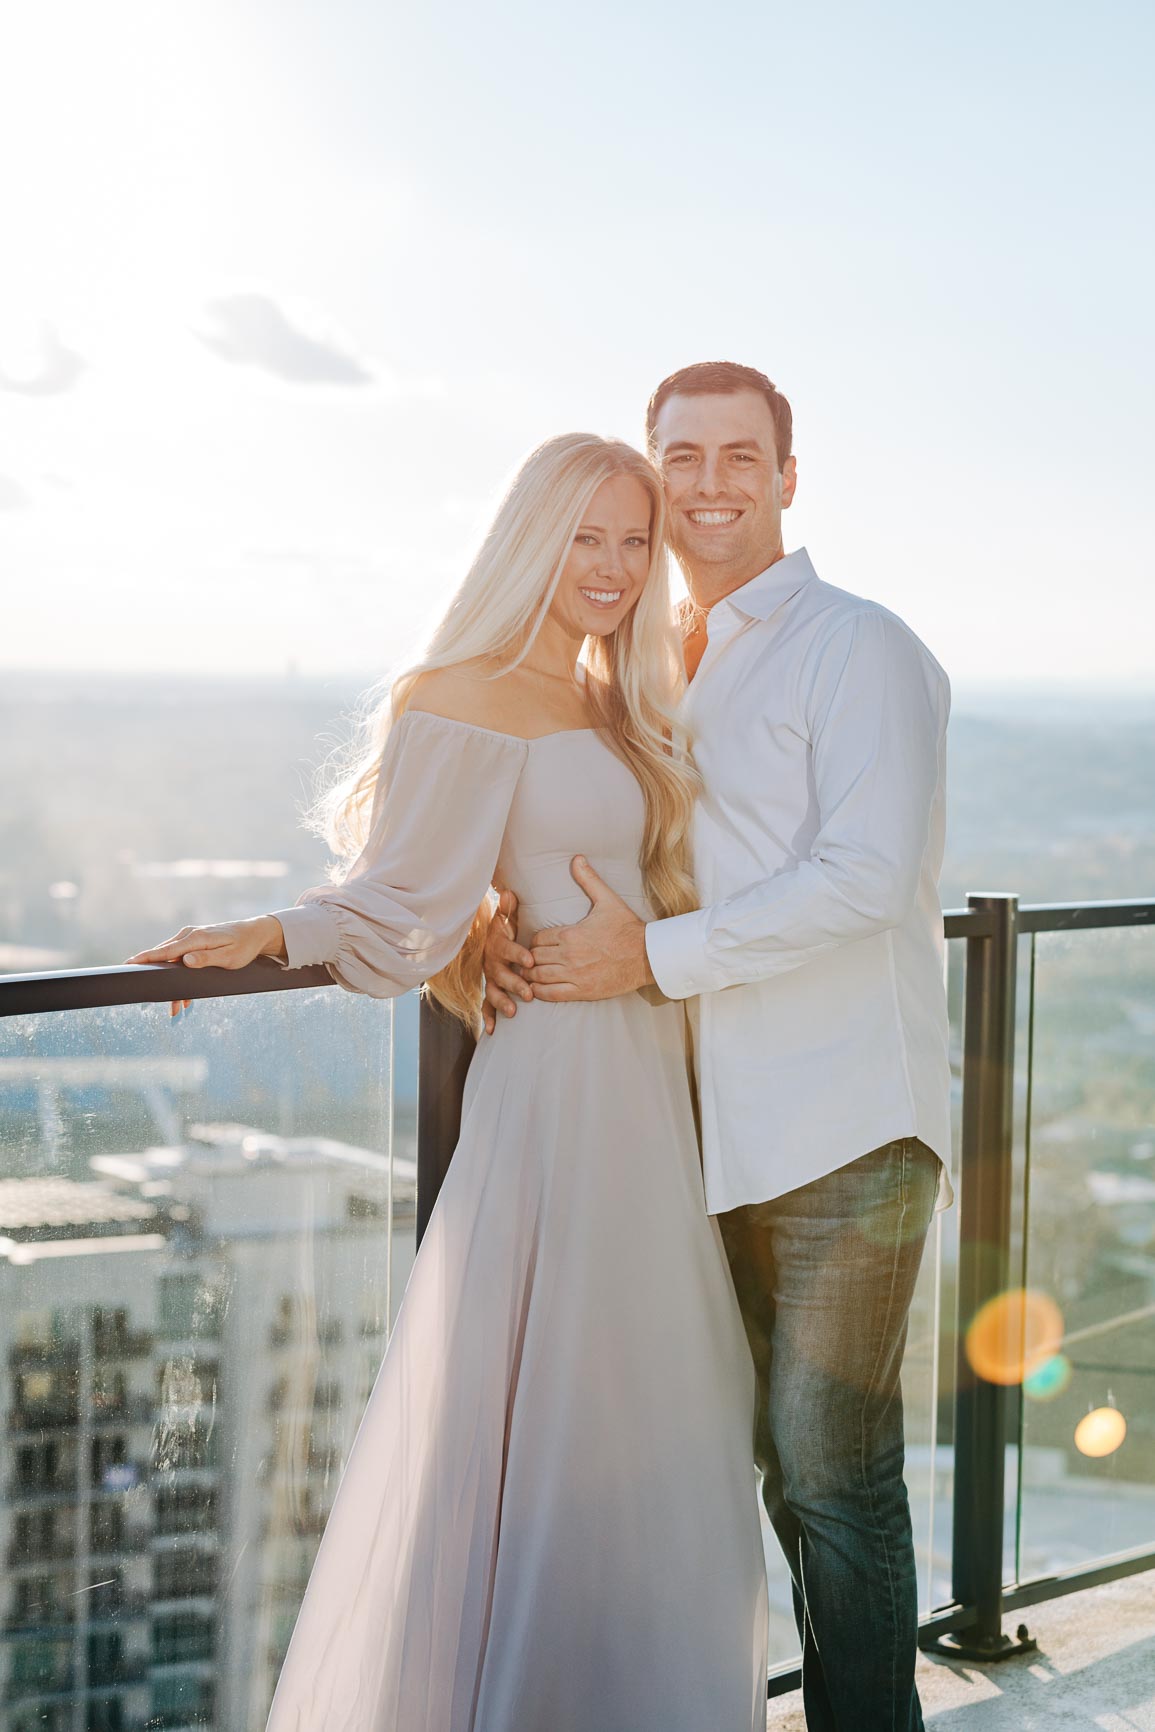 Uptown Charlotte engagement shot by Nhieu Tang Photography | nhieutang.com